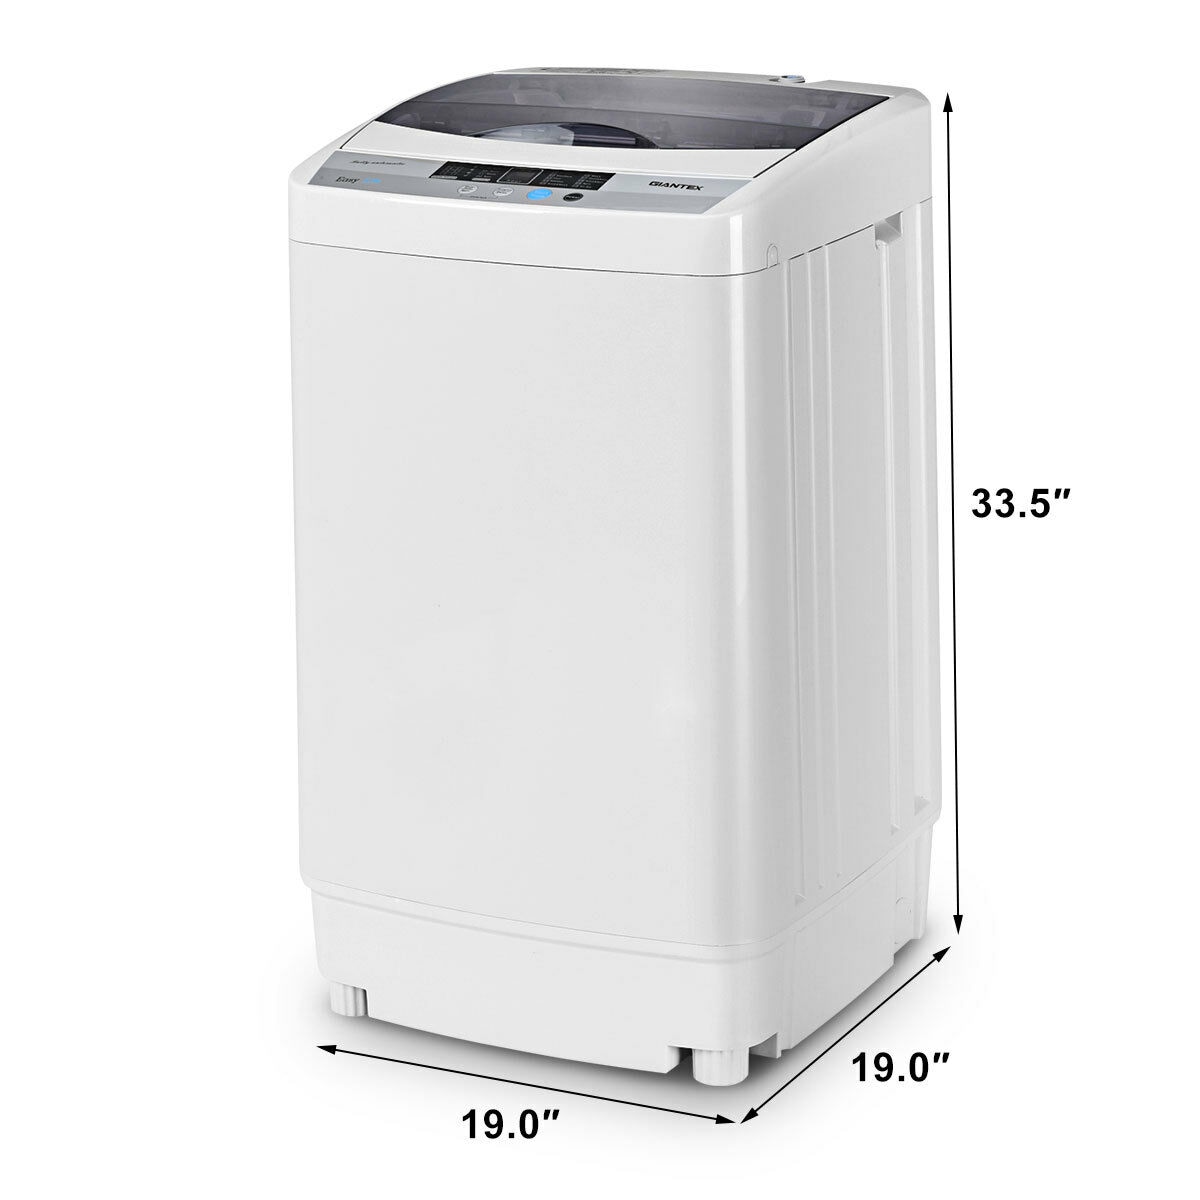 Costway High Efficiency Portable Washer & Dryer Combo in White/Gray with  Child Safety Lock & Reviews